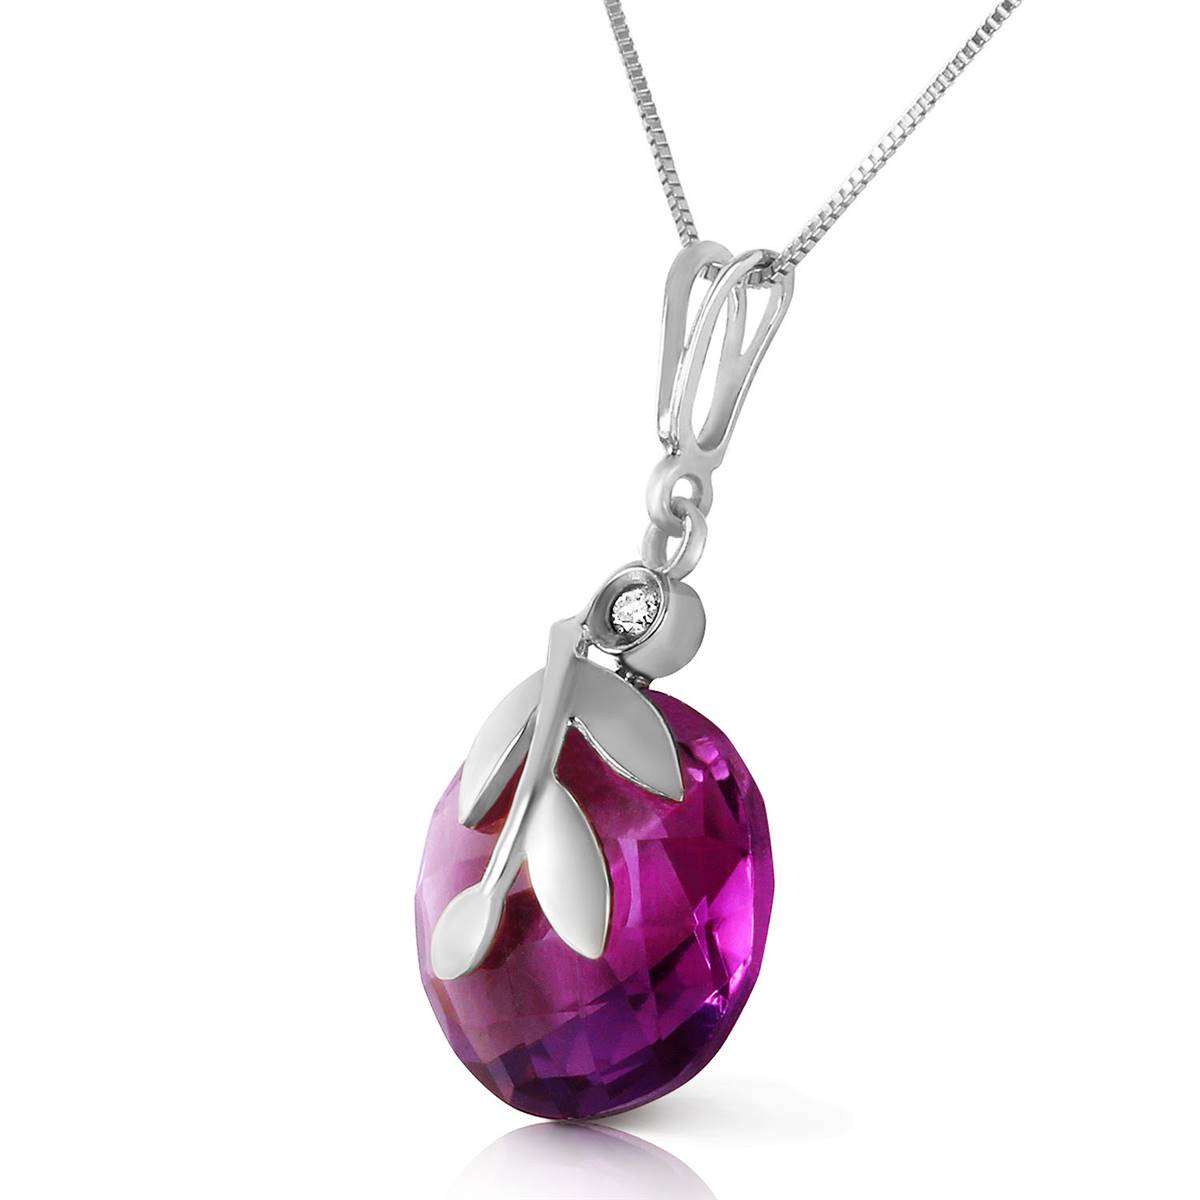 5.32 Carat 14K Solid White Gold Necklace Checkerboard Cut Purple Amethyst